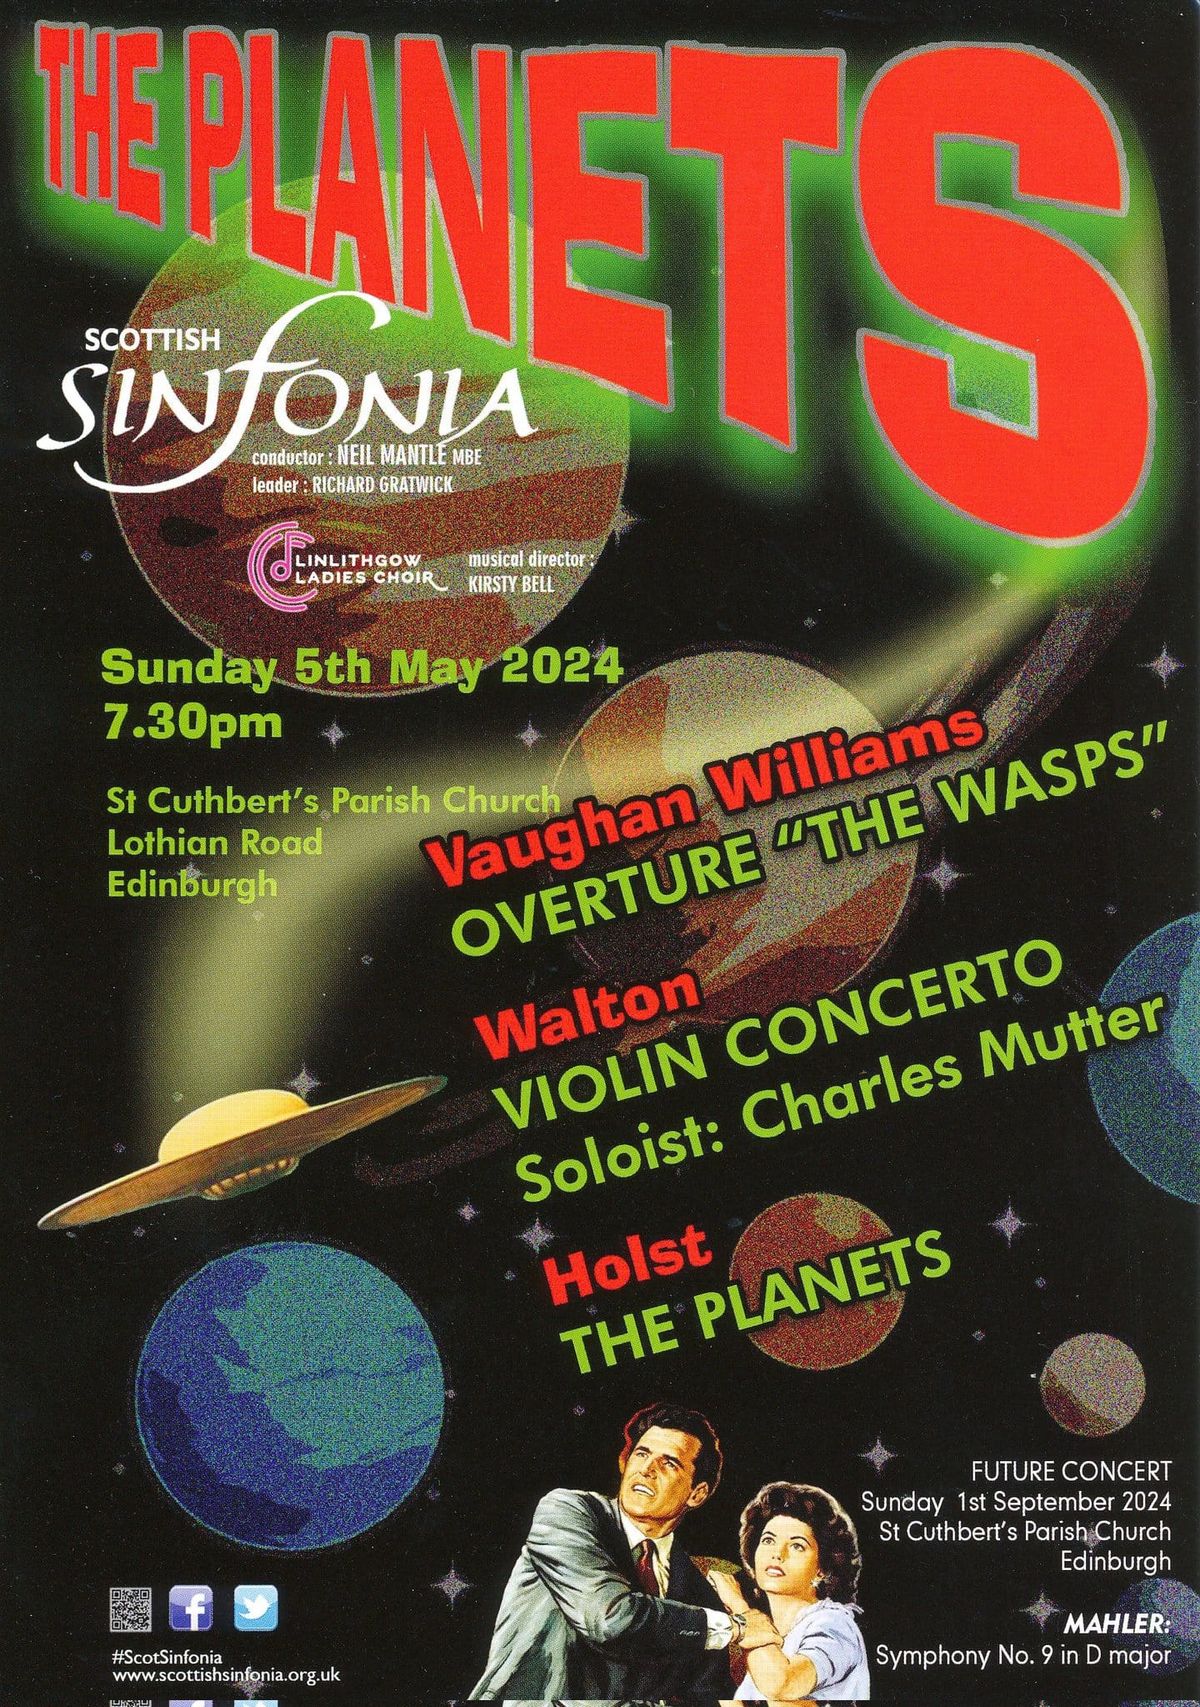 Scottish Sinfonia Concert 5th May 2024